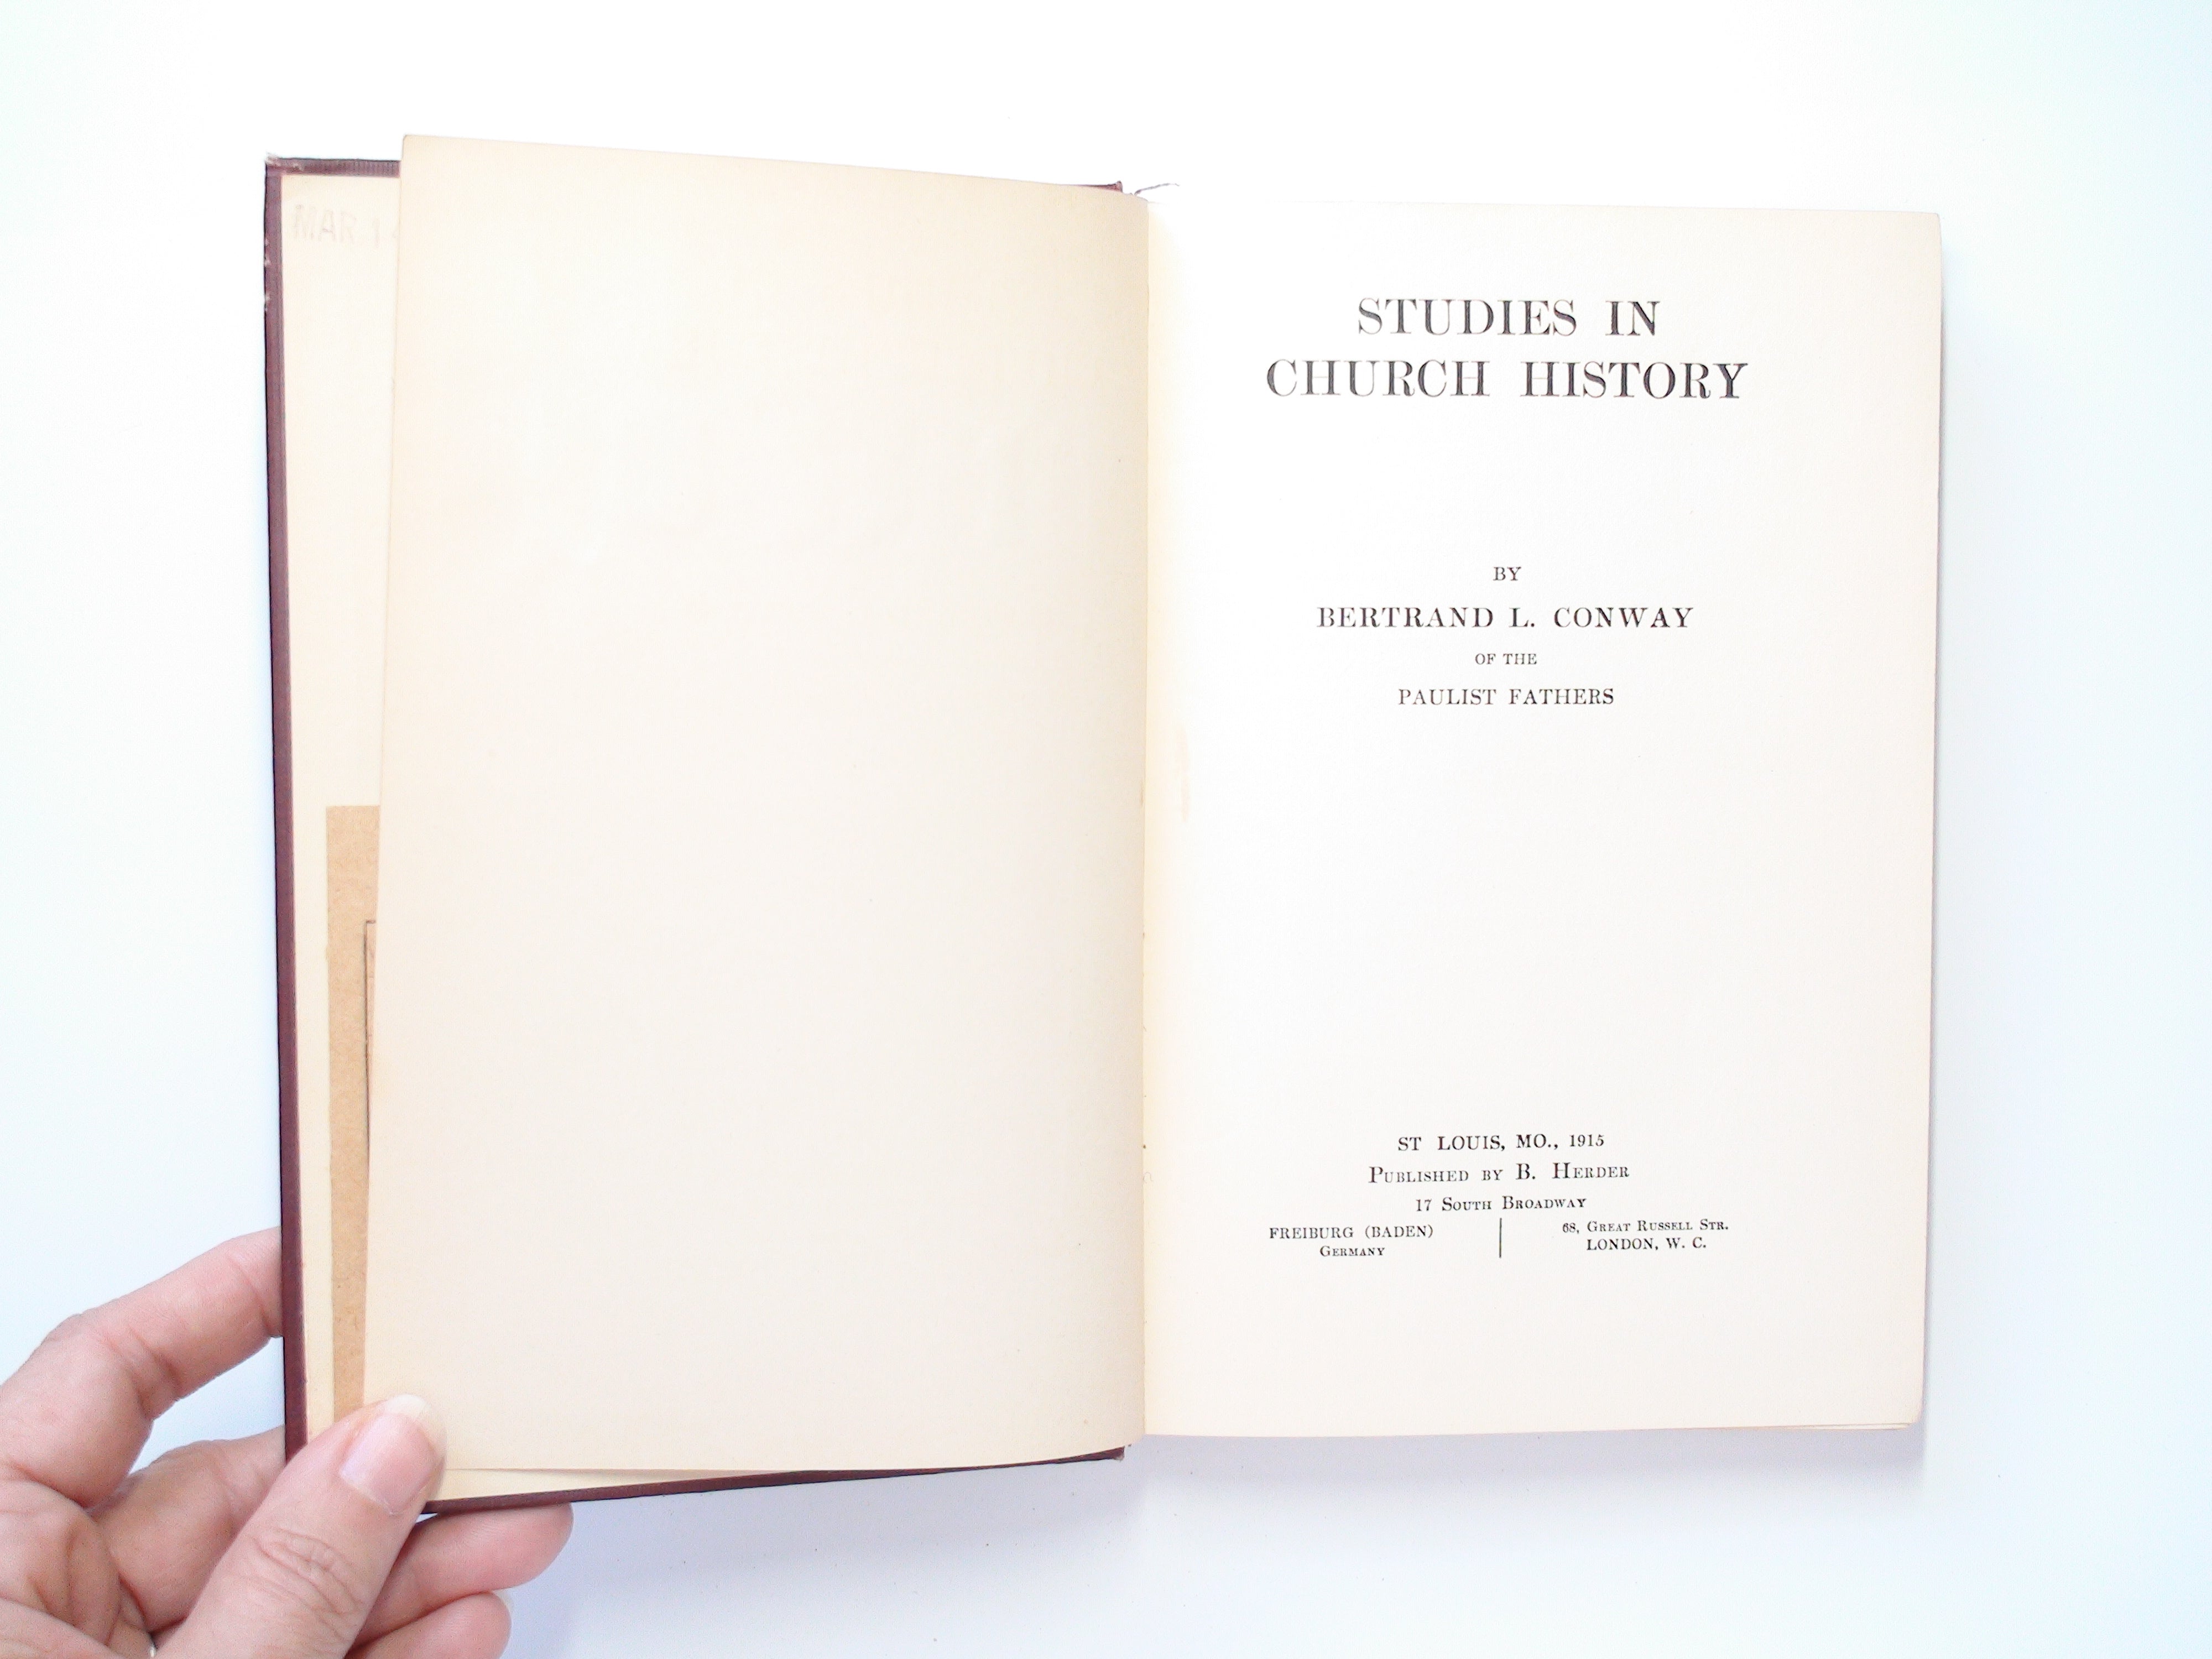 Studies in Church History, Bertrand L. Conway, Paulist Fathers, 1915